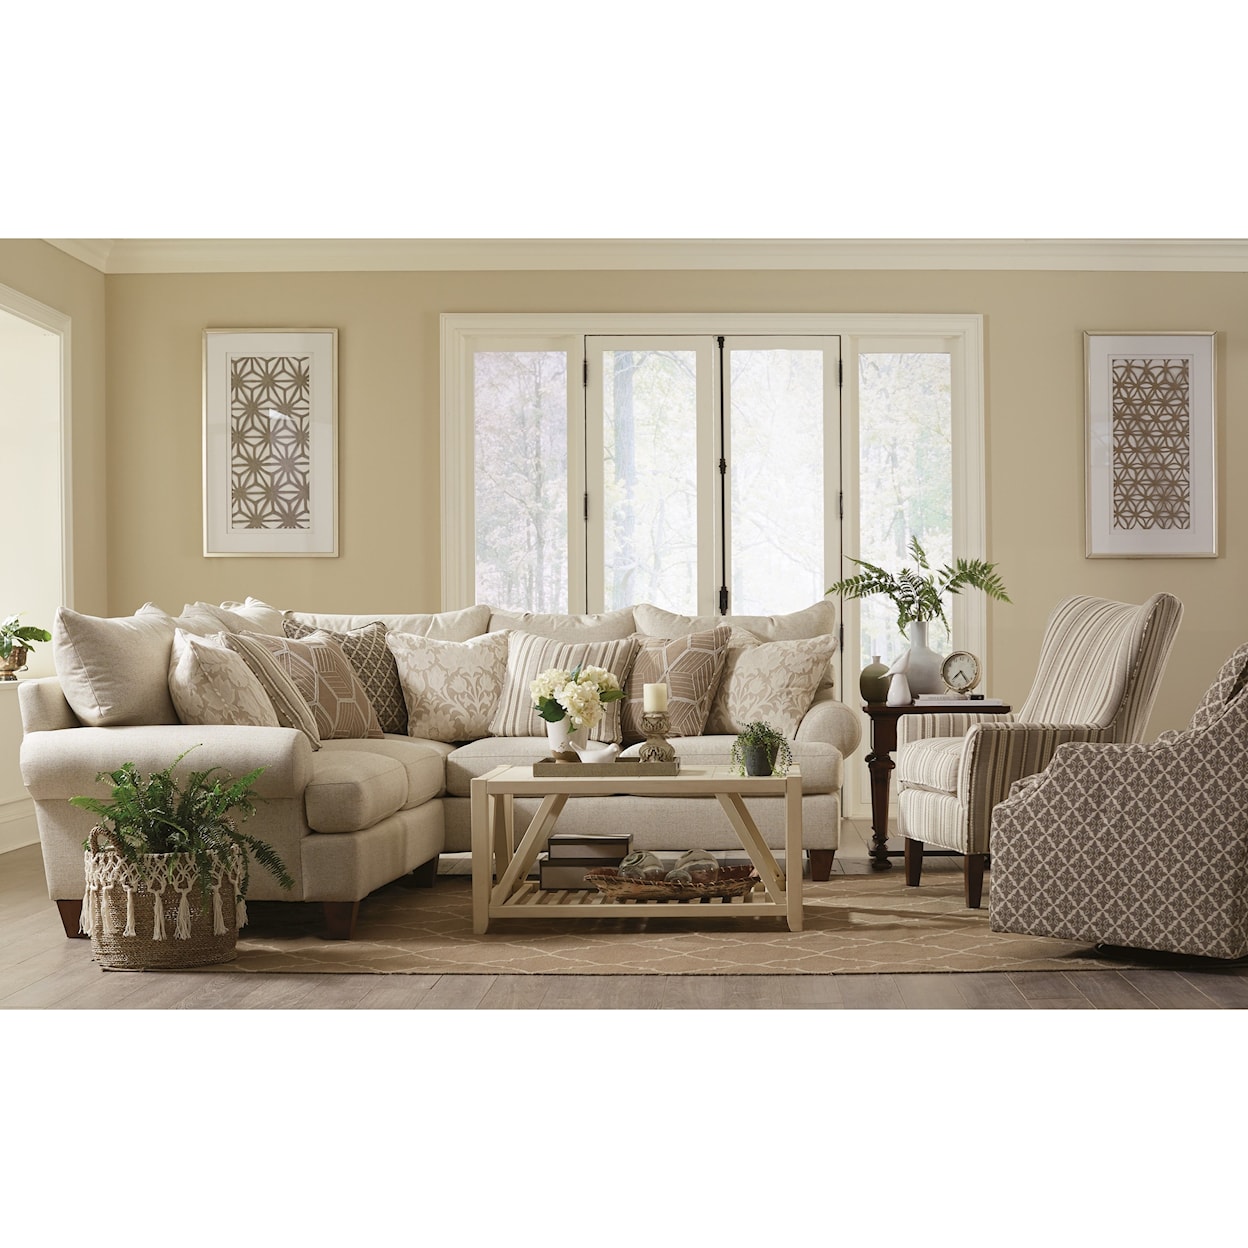 Hickory Craft P781650 4-Seat Sectional Sofa